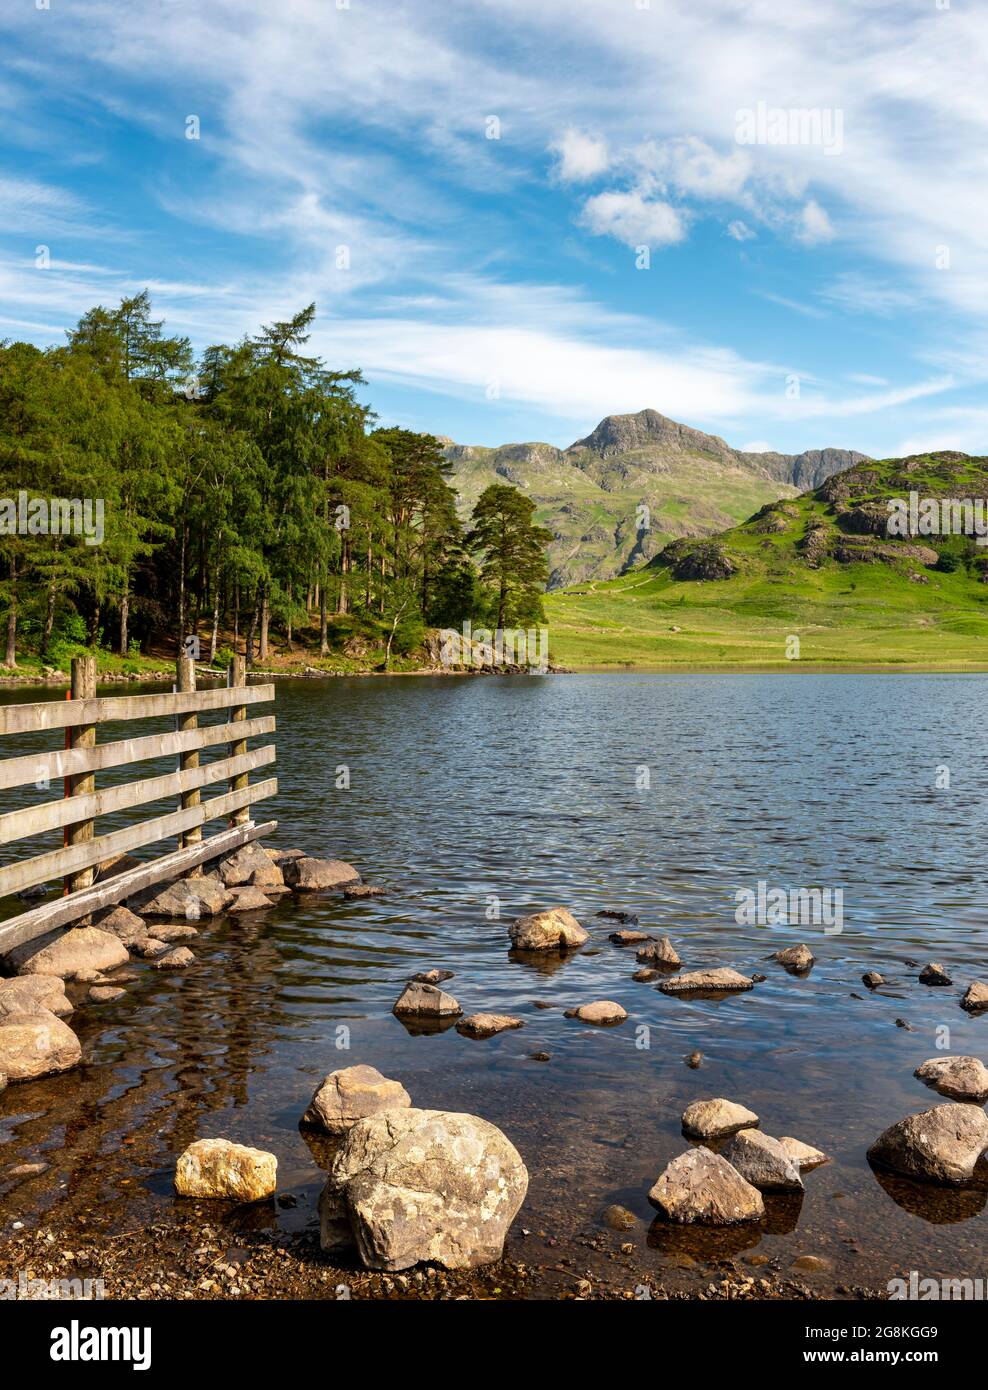 Blea tarn, Langdale Pikes, Side brochet, Lake district National Park, Cumbria, Angleterre, Royaume-Uni Banque D'Images